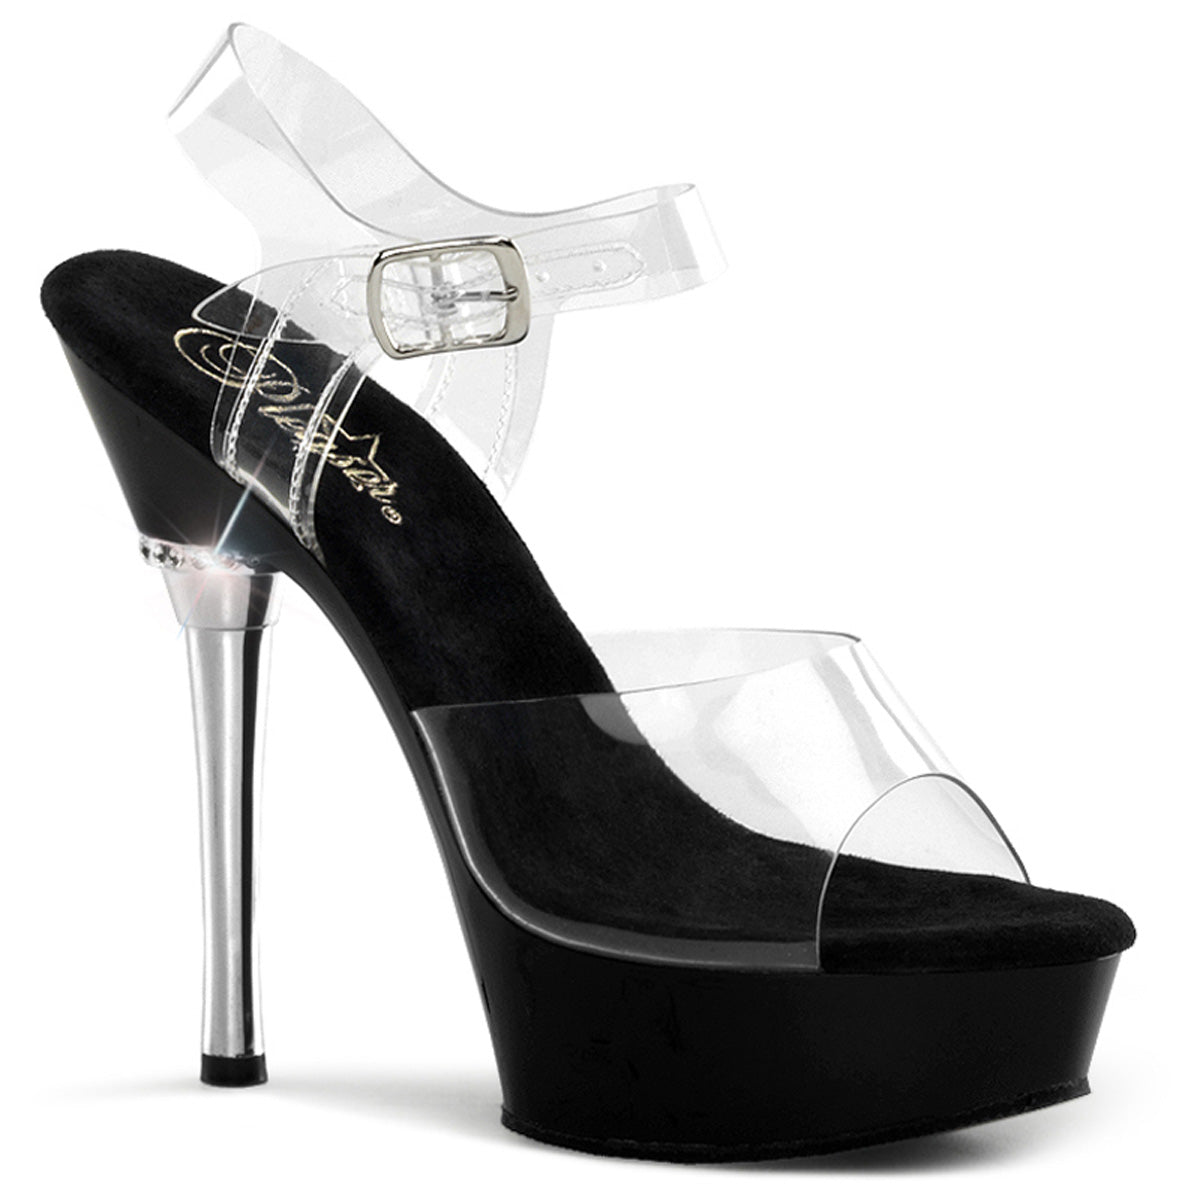 Allure-608 5.5 "Heel Clear and Black Pole Dancing Shoes